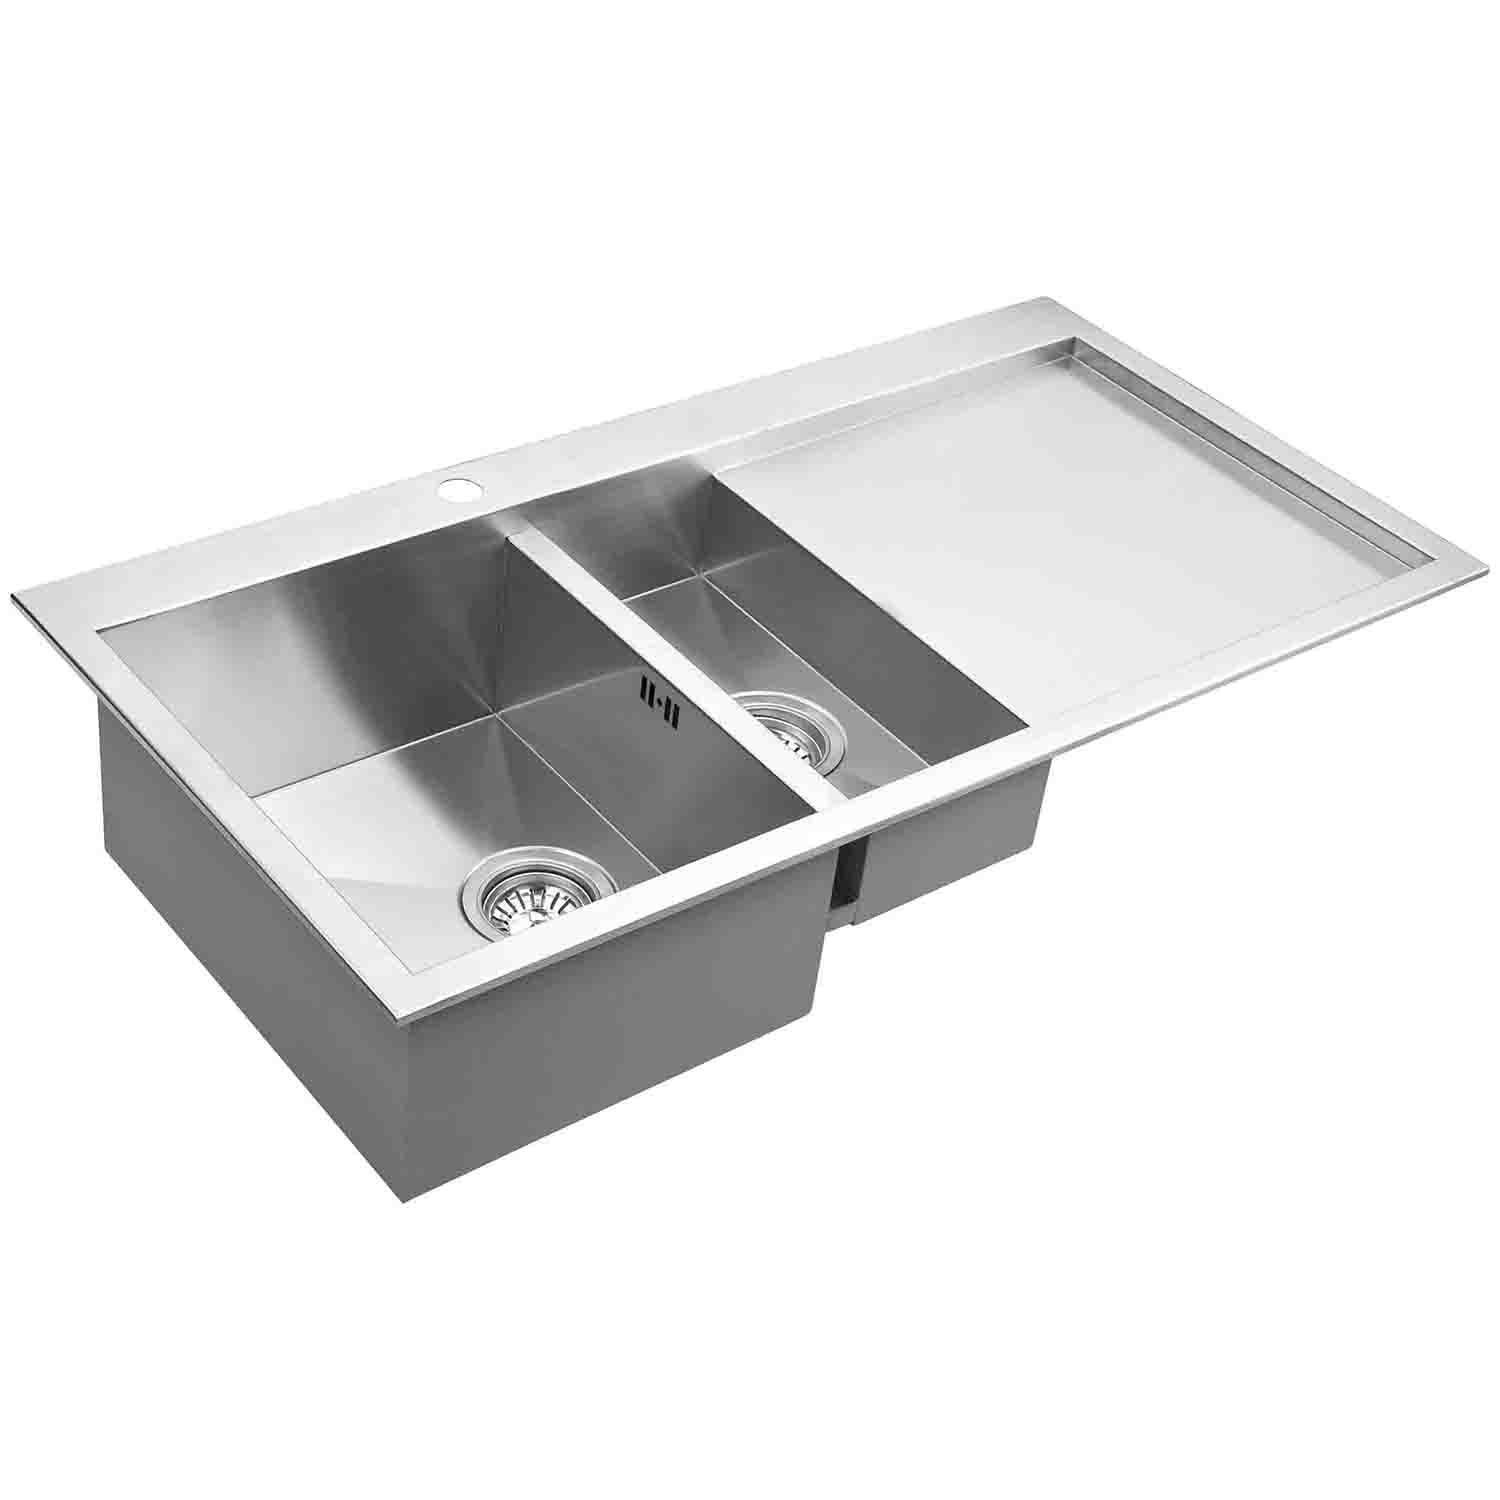 DAX Handmade Double Bowl Top Mount Kitchen Sink with Draining Board, 18 Gauge Stainless Steel, Brushed Finish, 34 x 20 x 8 Inches (DAX-AT100DP)